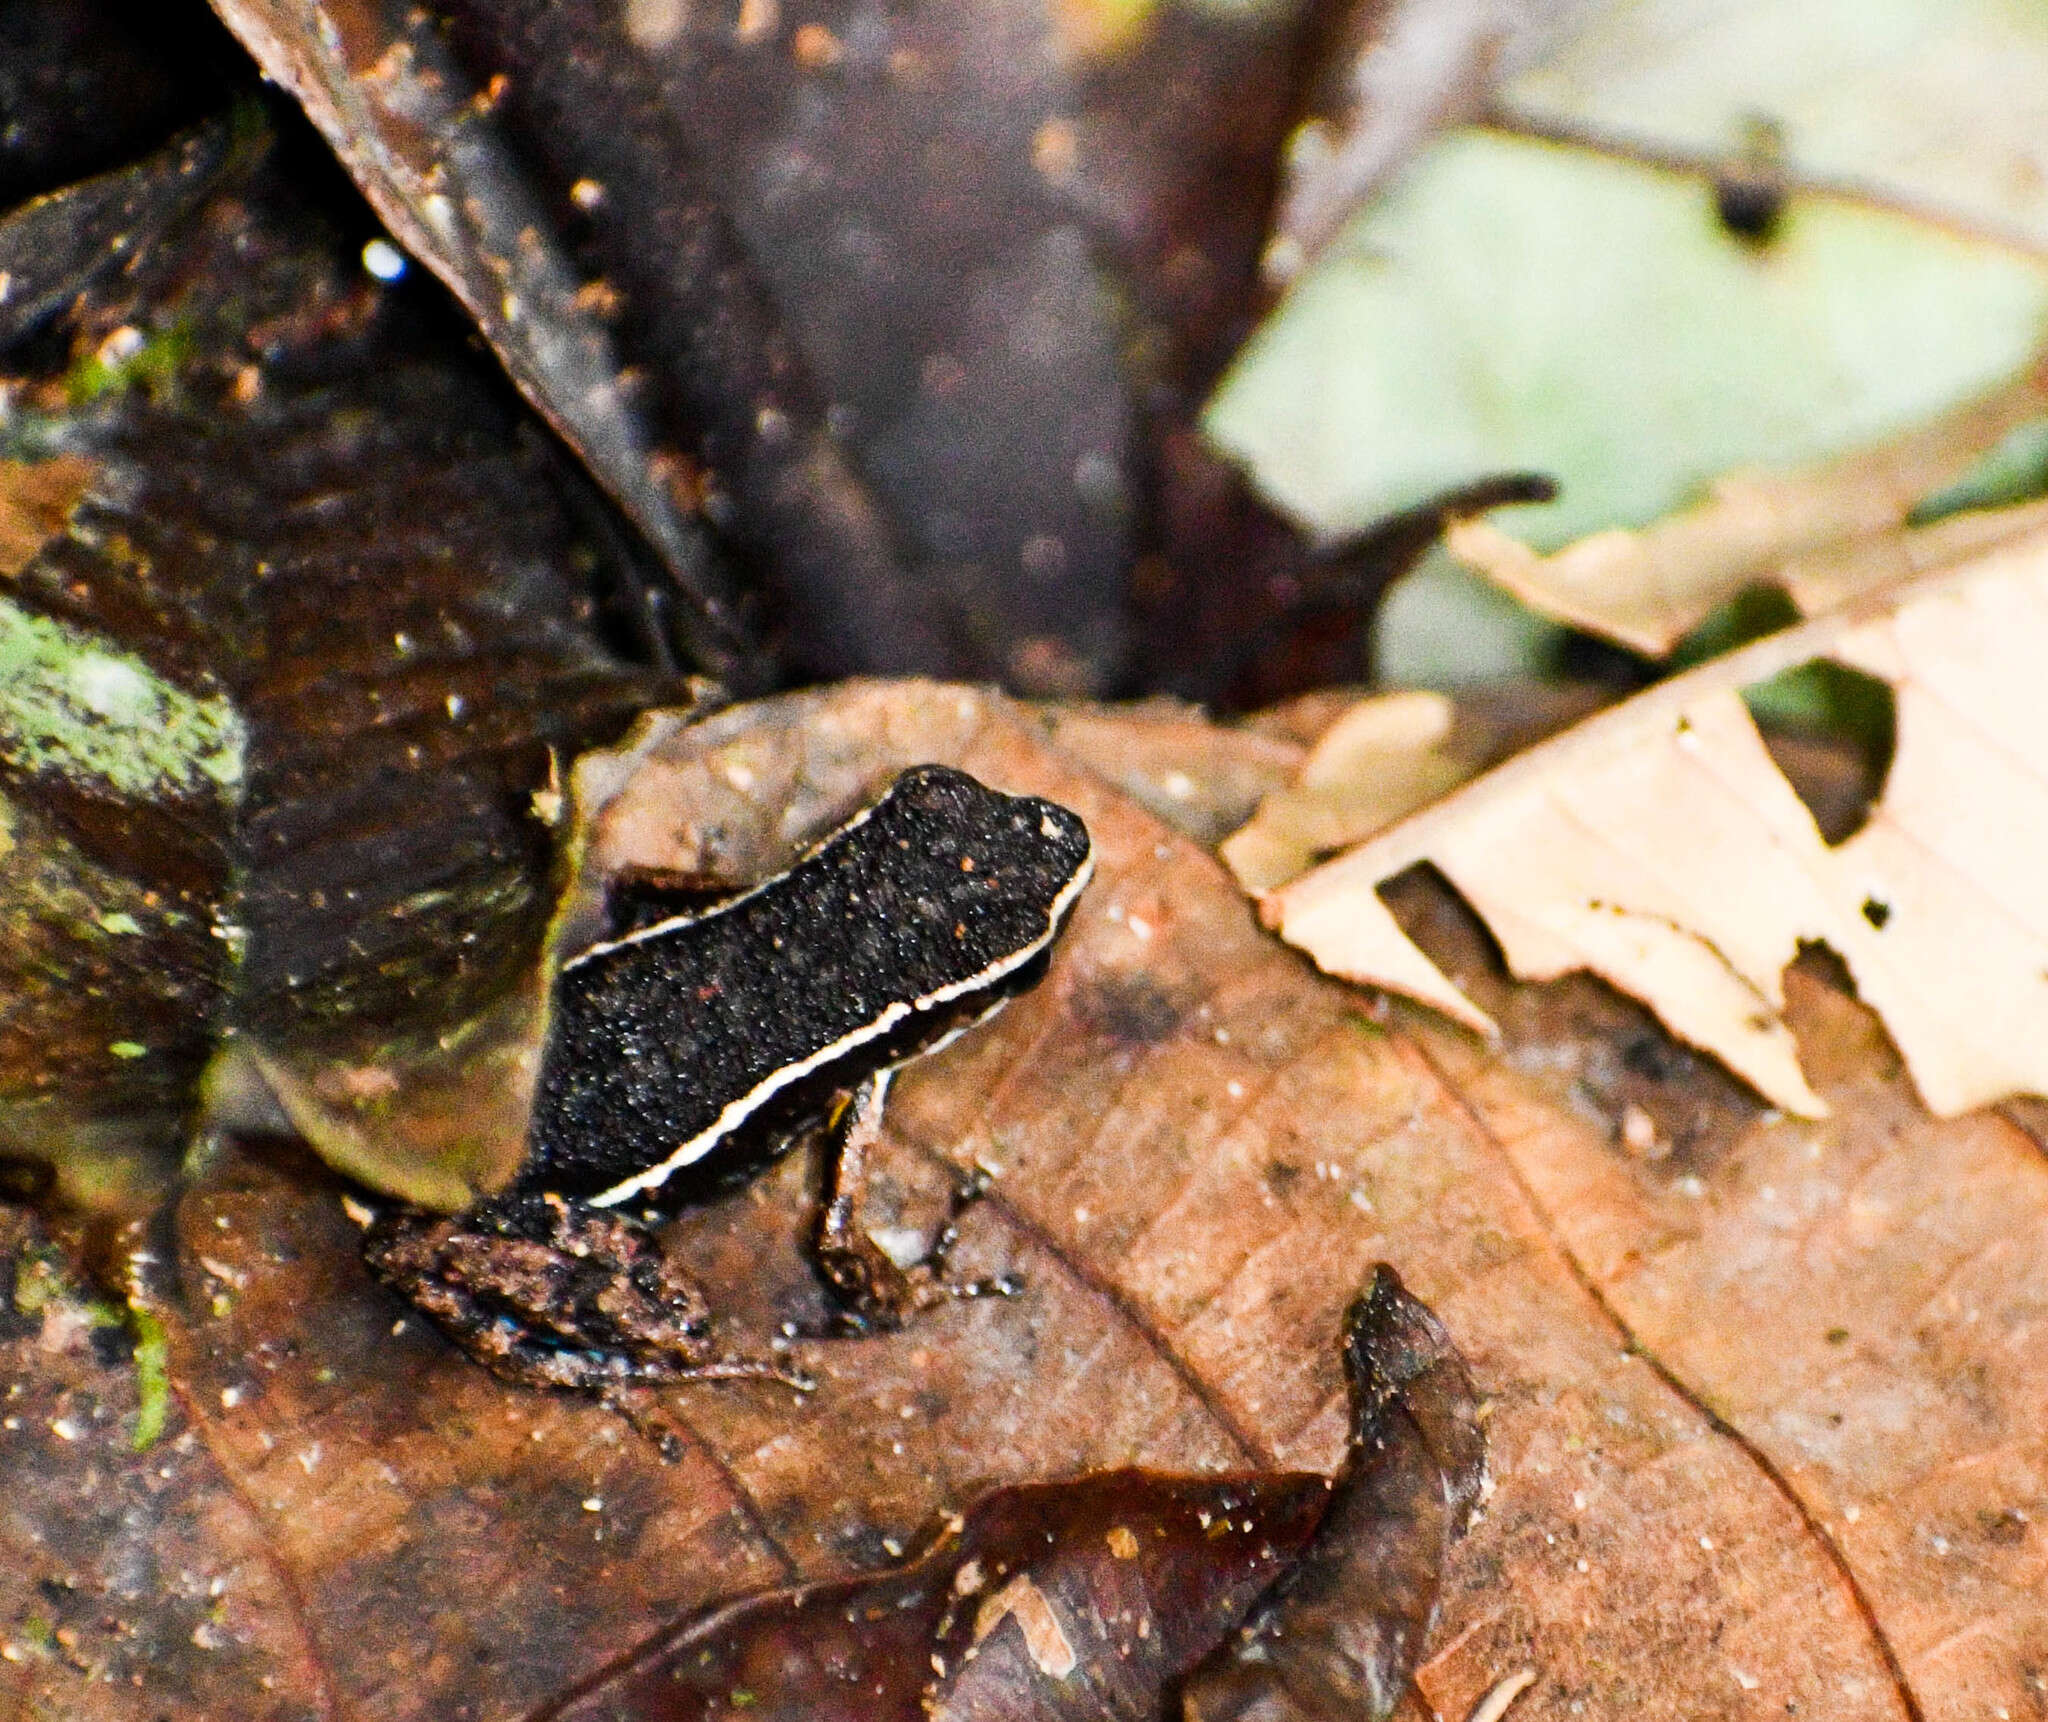 Image of Hahnel's Poison Frog